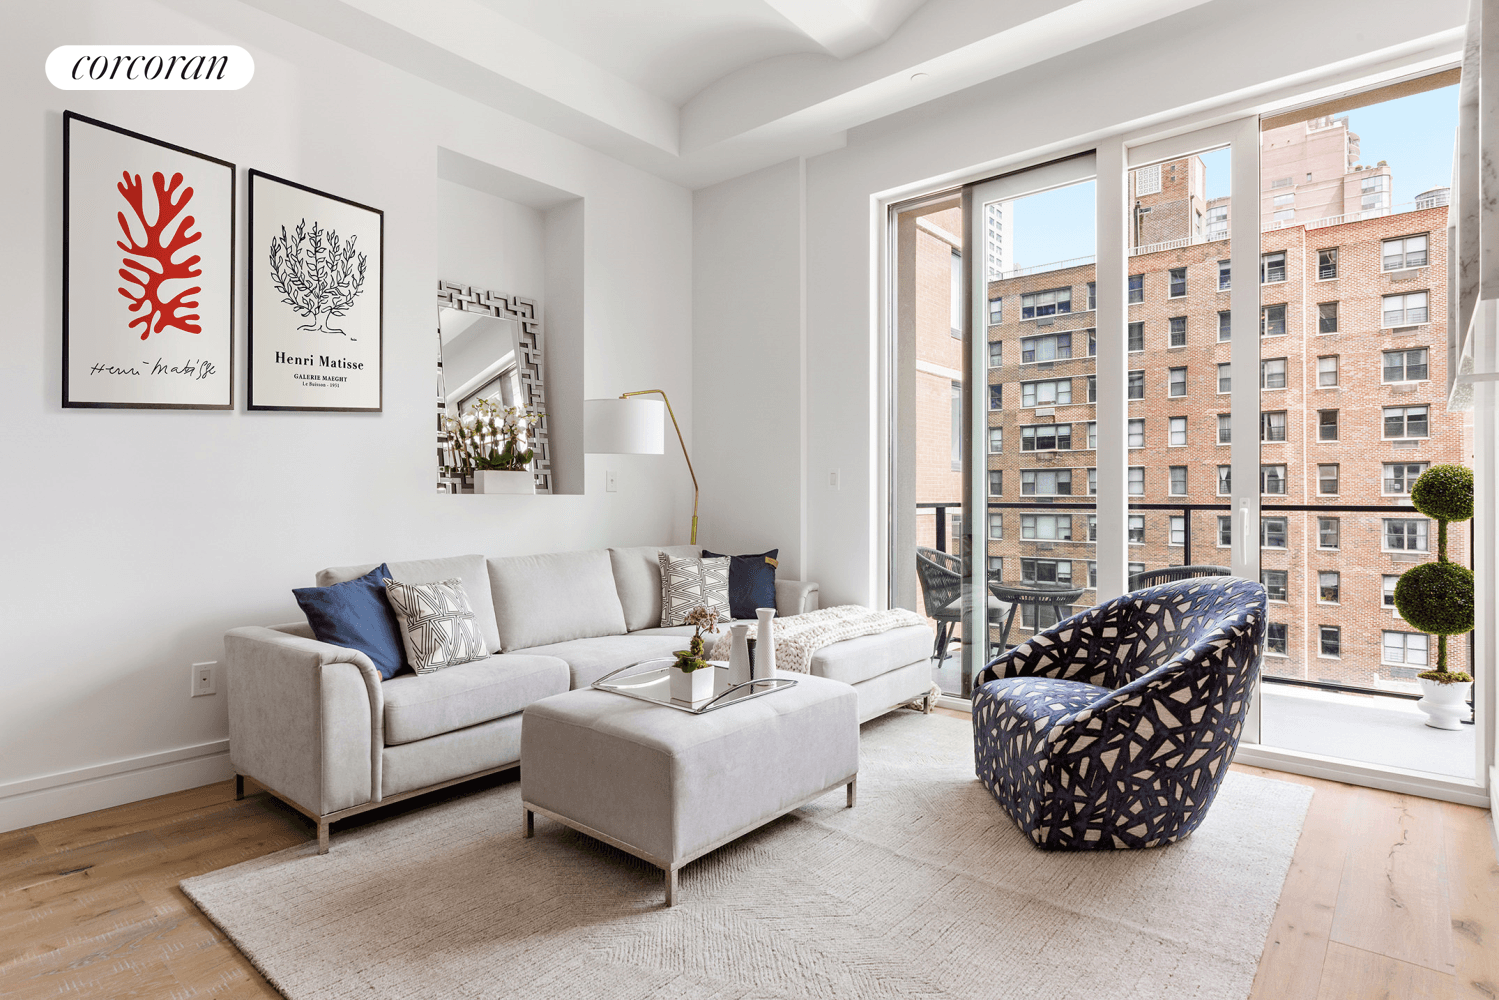 Archive Lofts, where Tribeca style living meets an East side address.